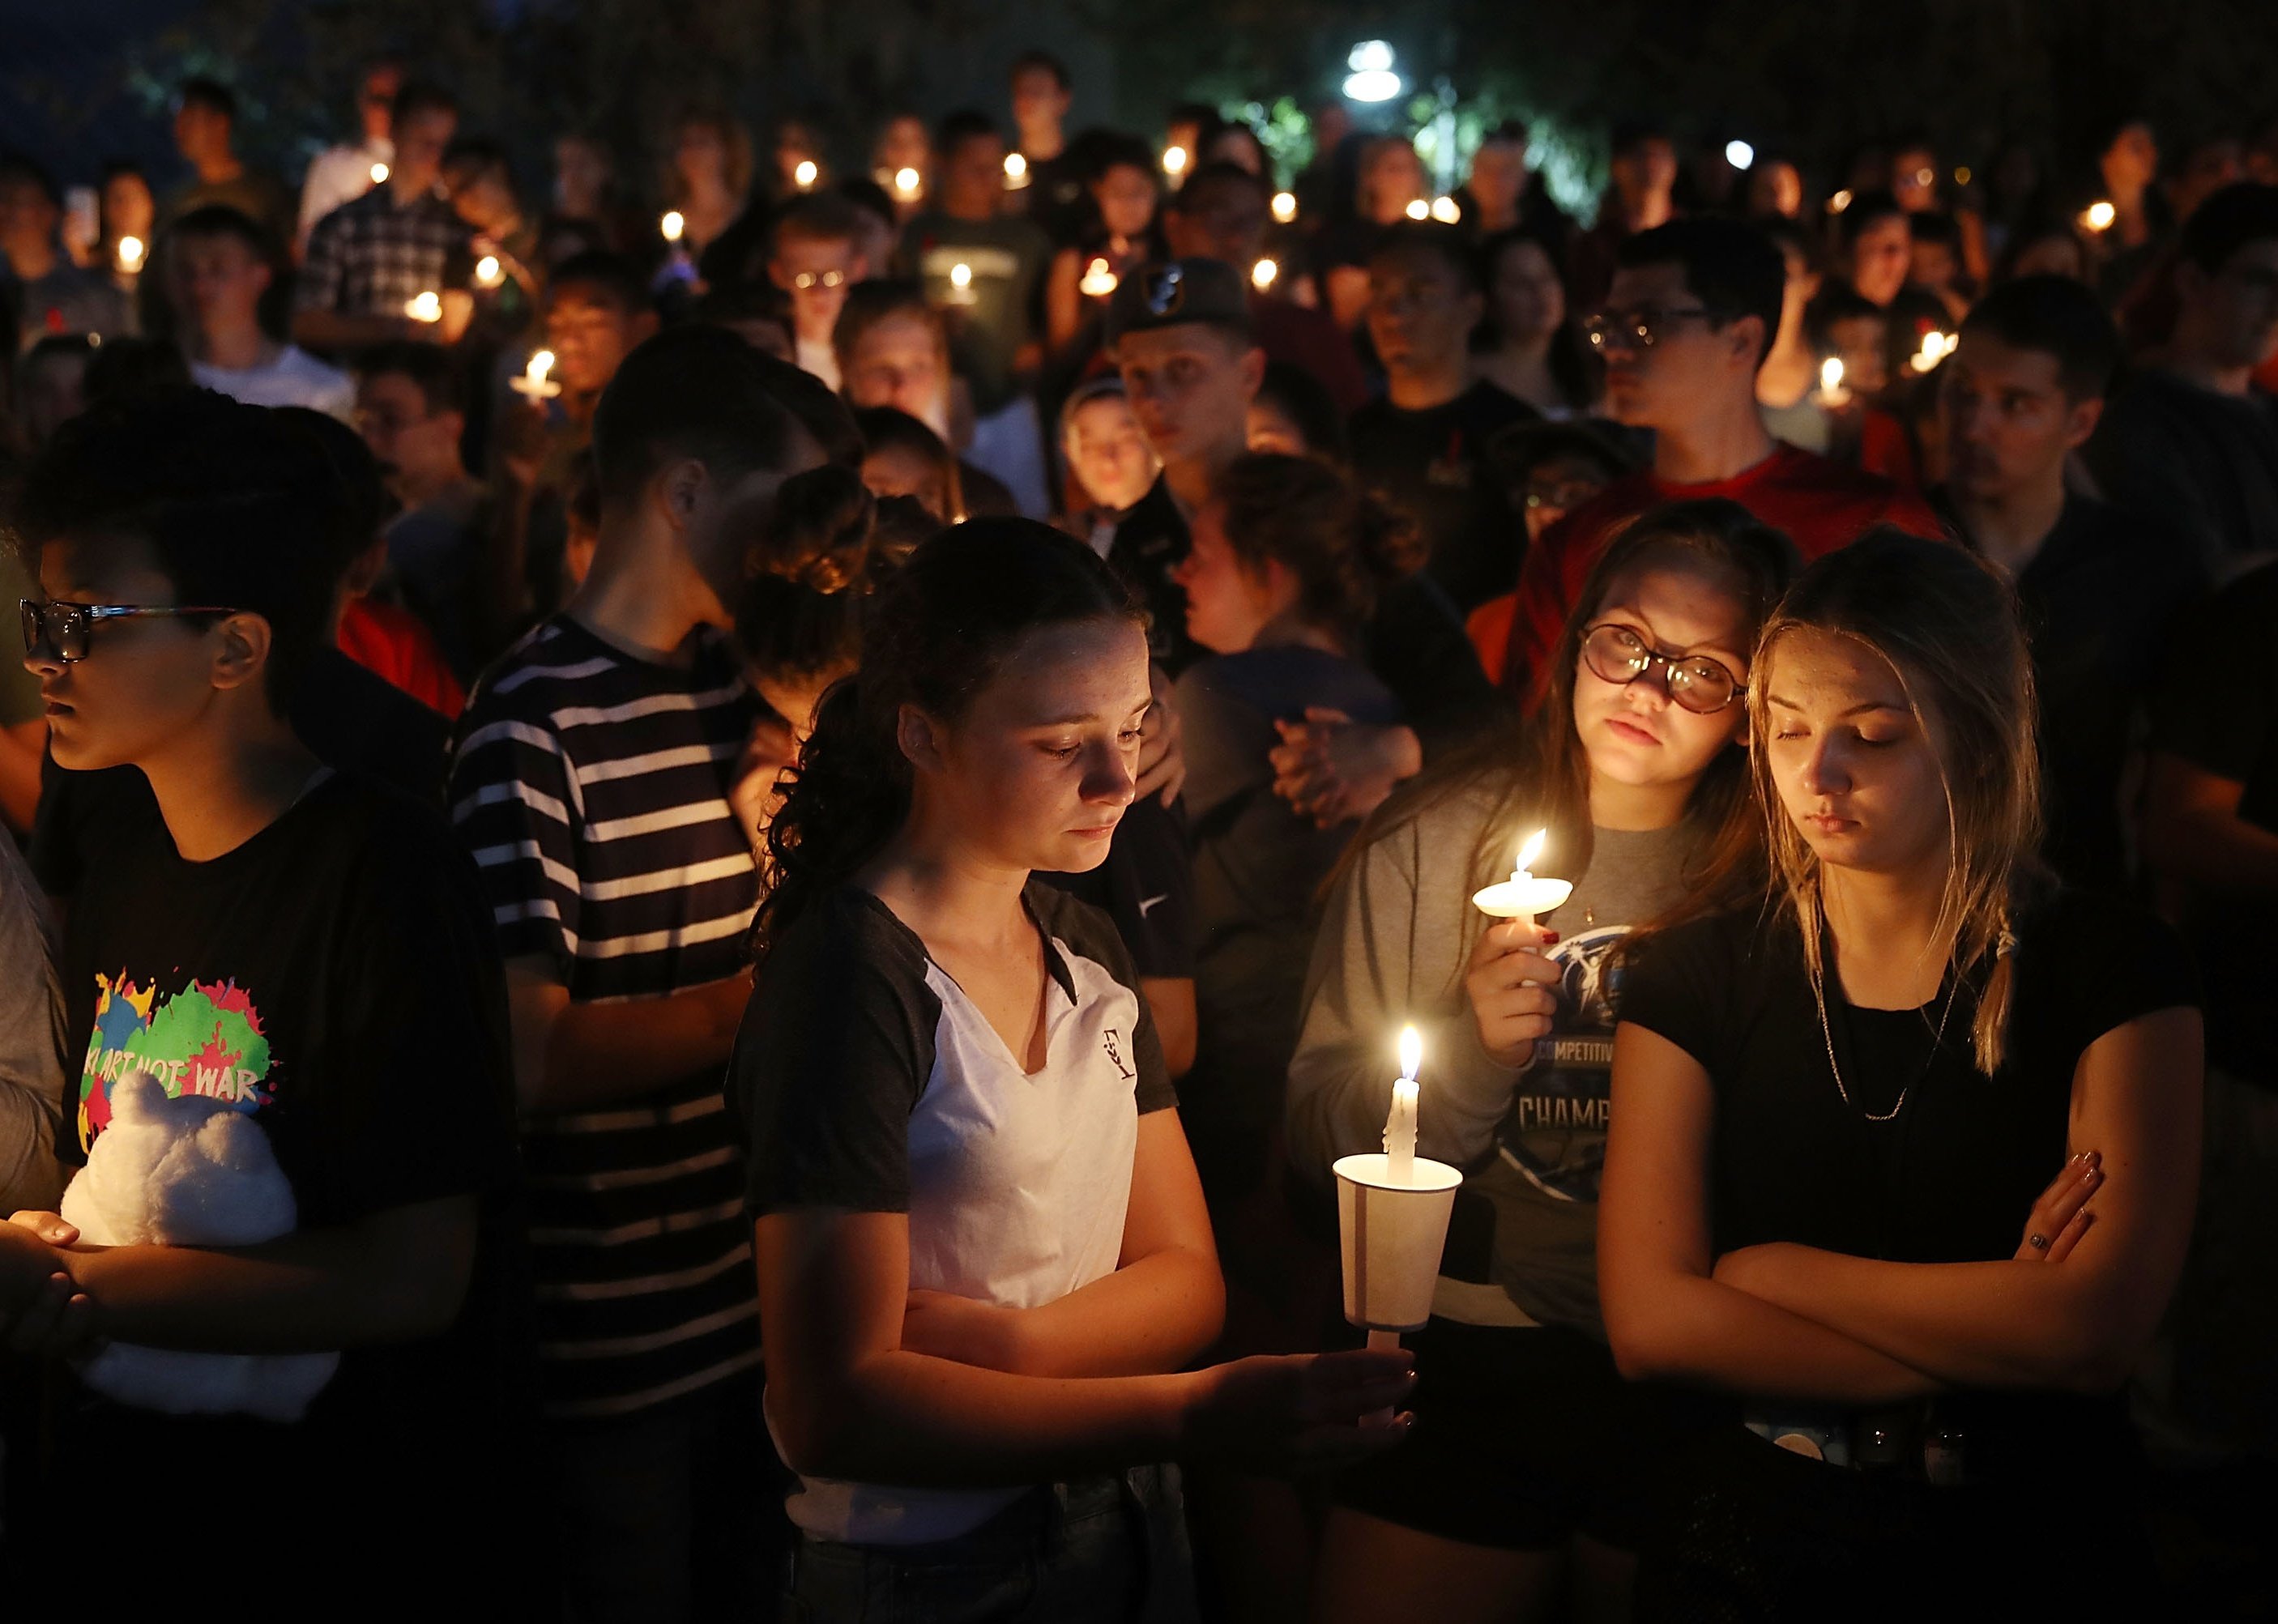 People attend a memorial service for the victims of the shooting at Marjory Stoneman Douglas High School.